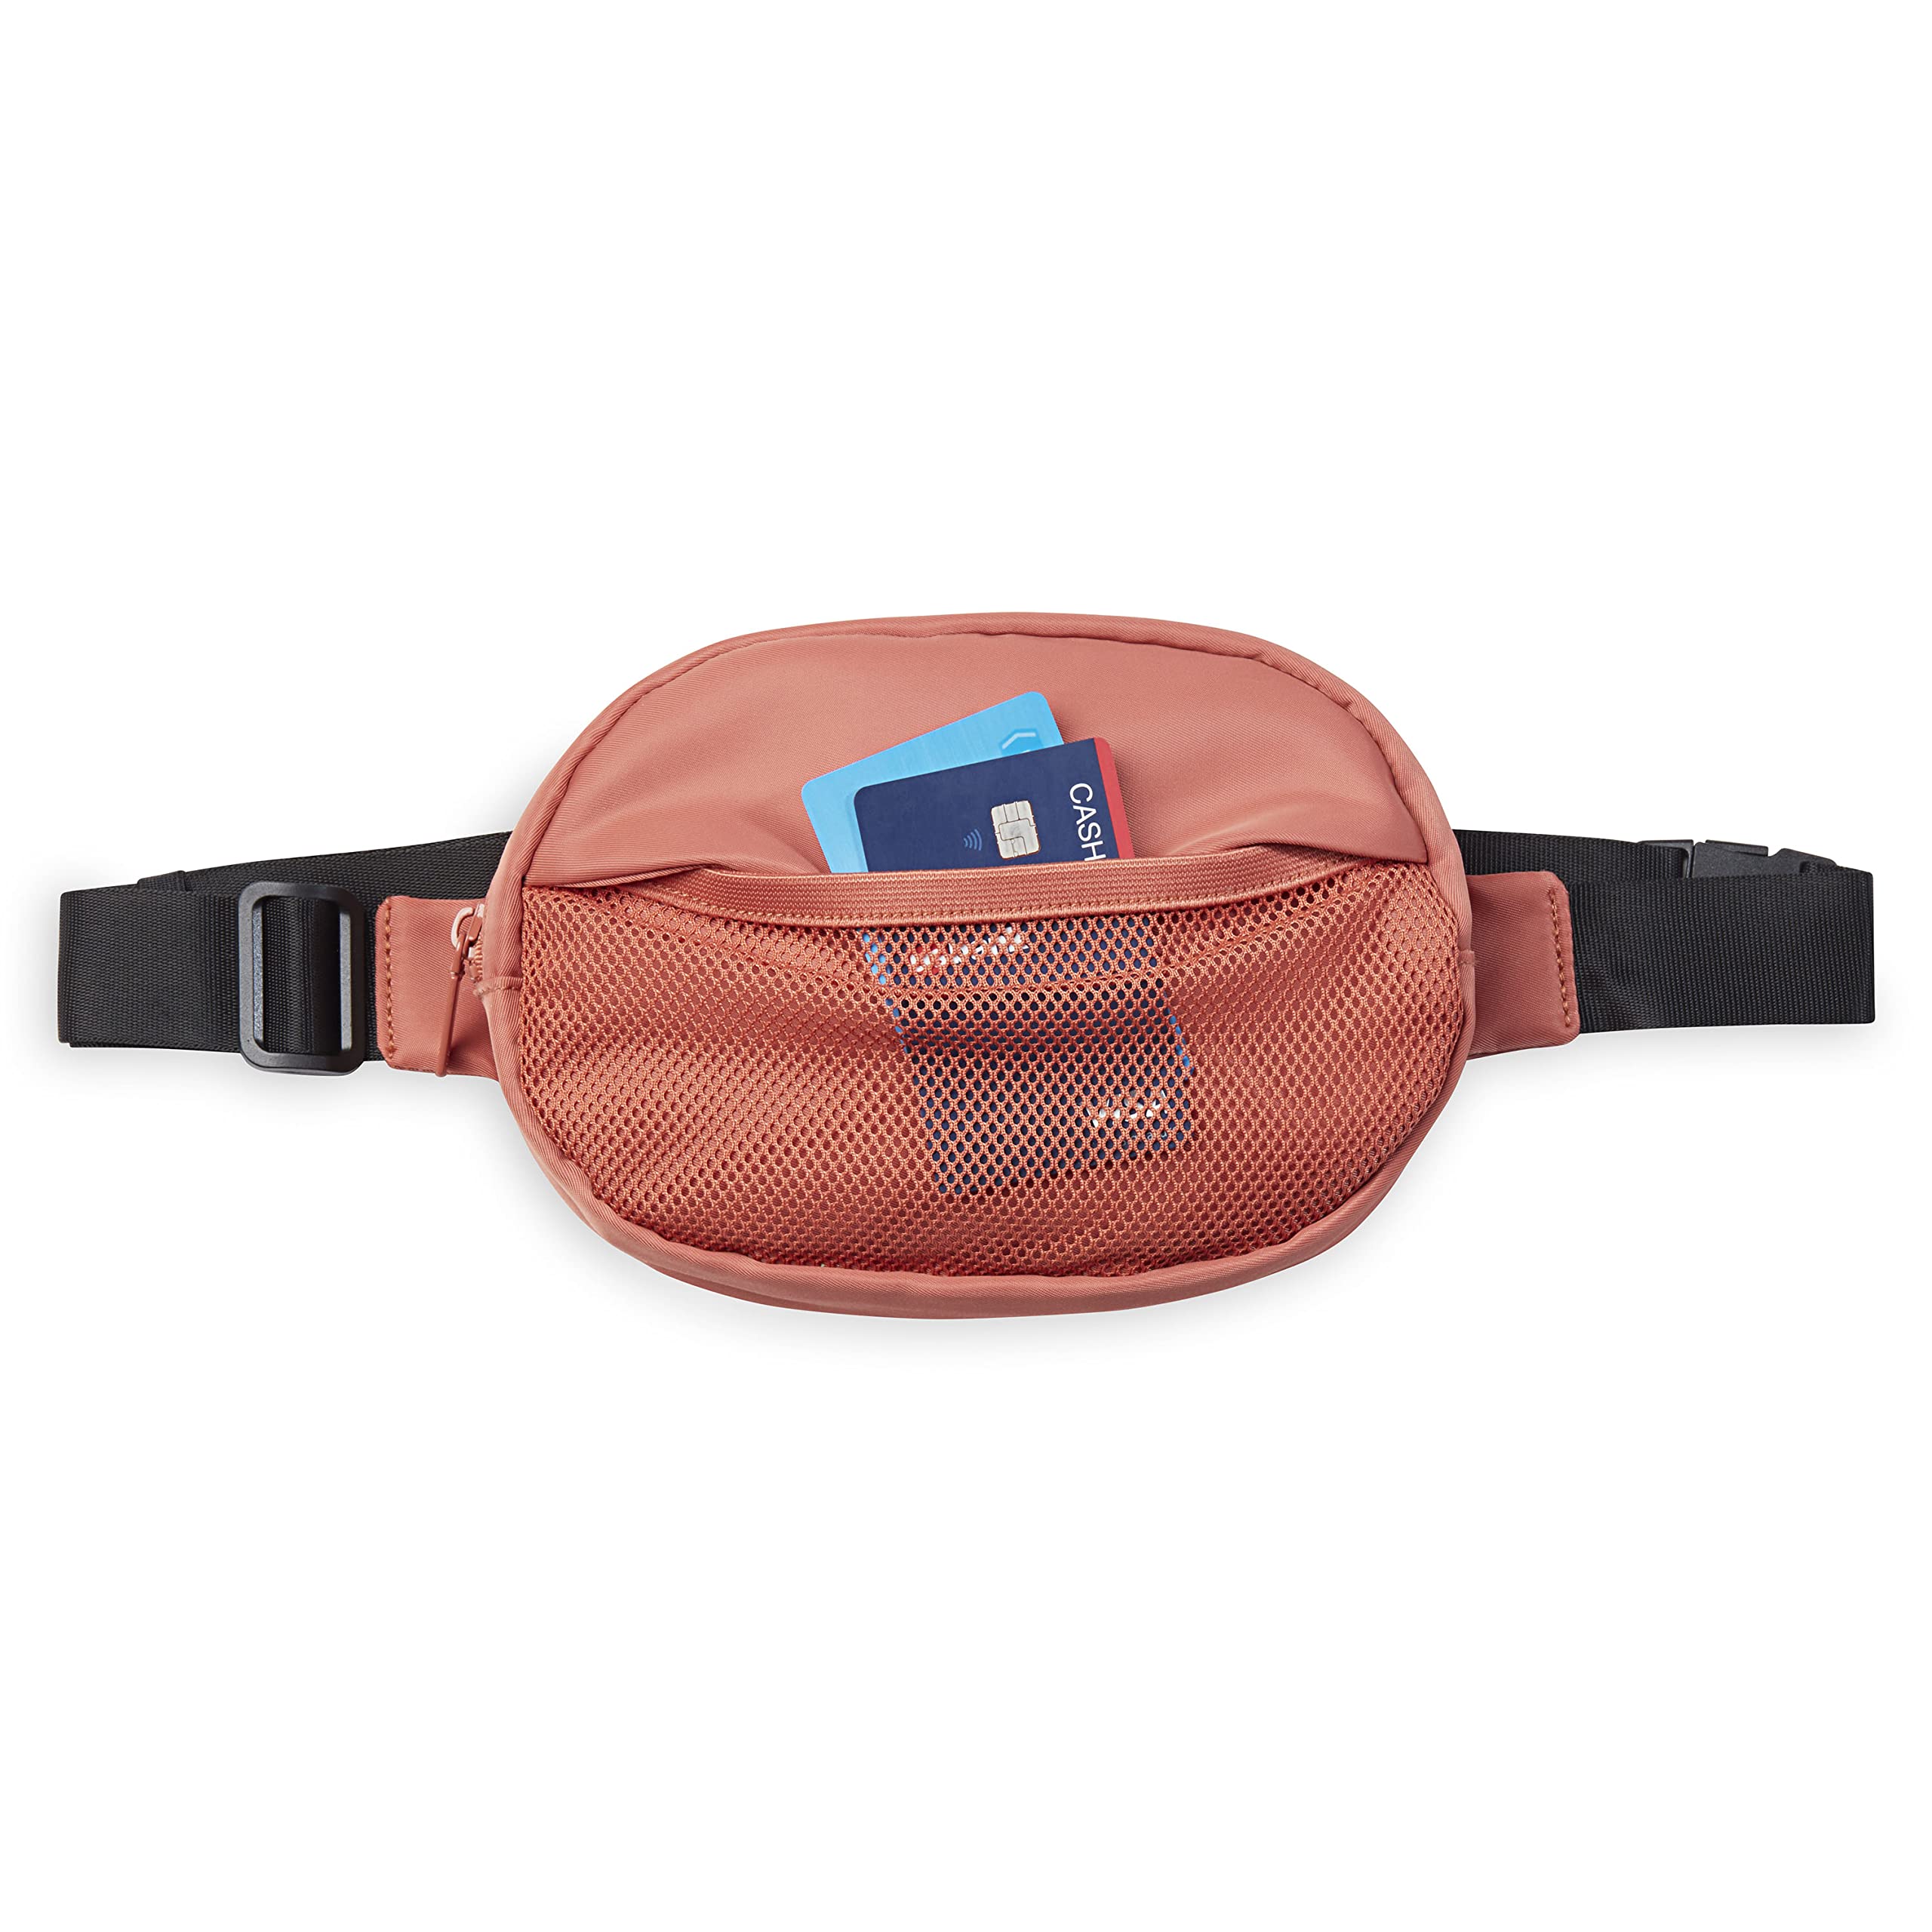 Gaiam Go for It Waist Pack, Adjustable Fanny Pack Crossbody Bags for Women & Men - Waterproof Cross Body Bag with Zippered Pockets, Running Belt Bag, Ideal for Vacation & Travel